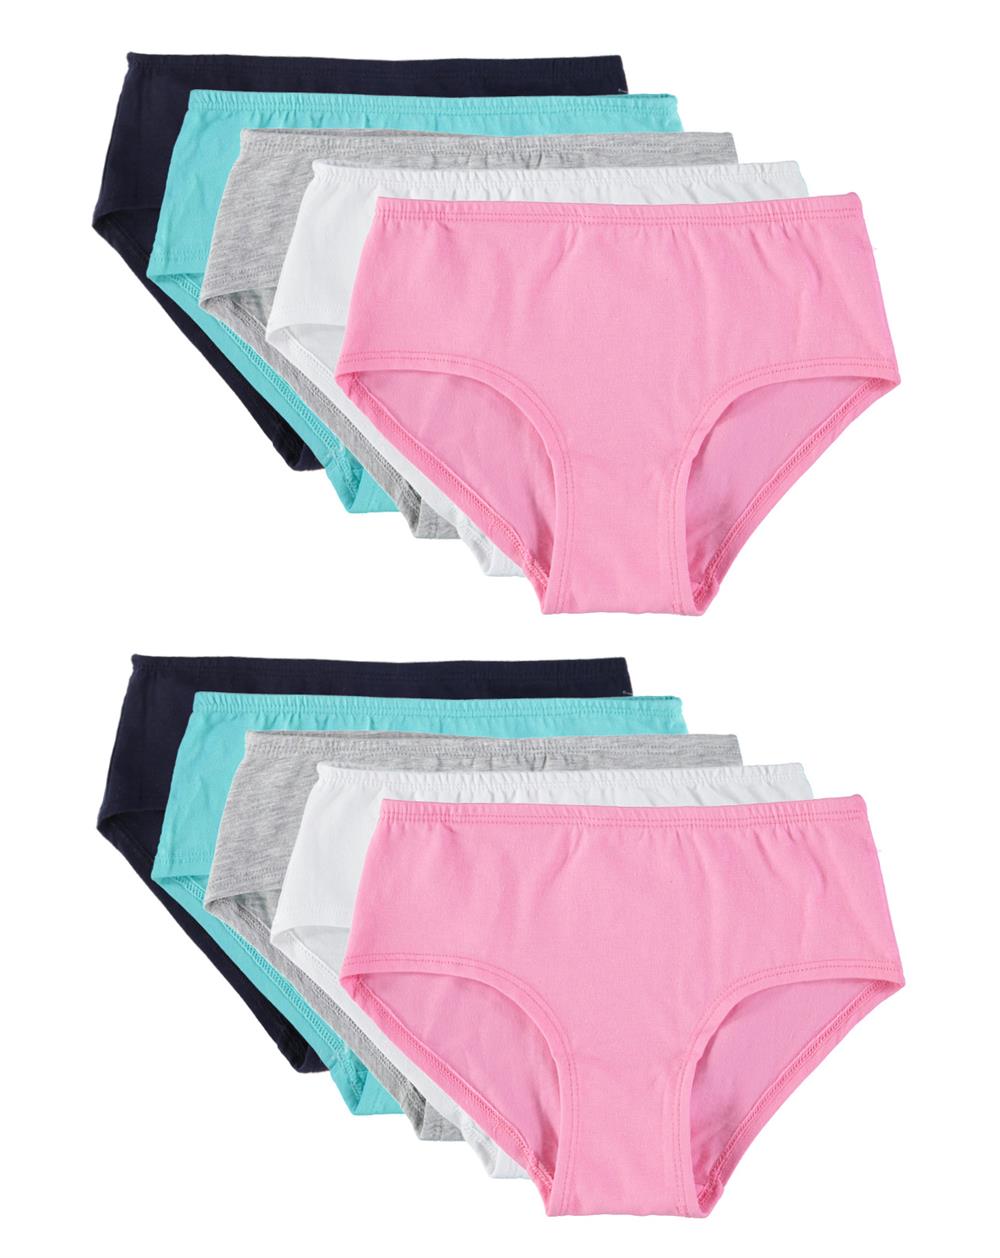 Fruit of the Loom Girls' Assorted Cotton Hipster Underwear, 10